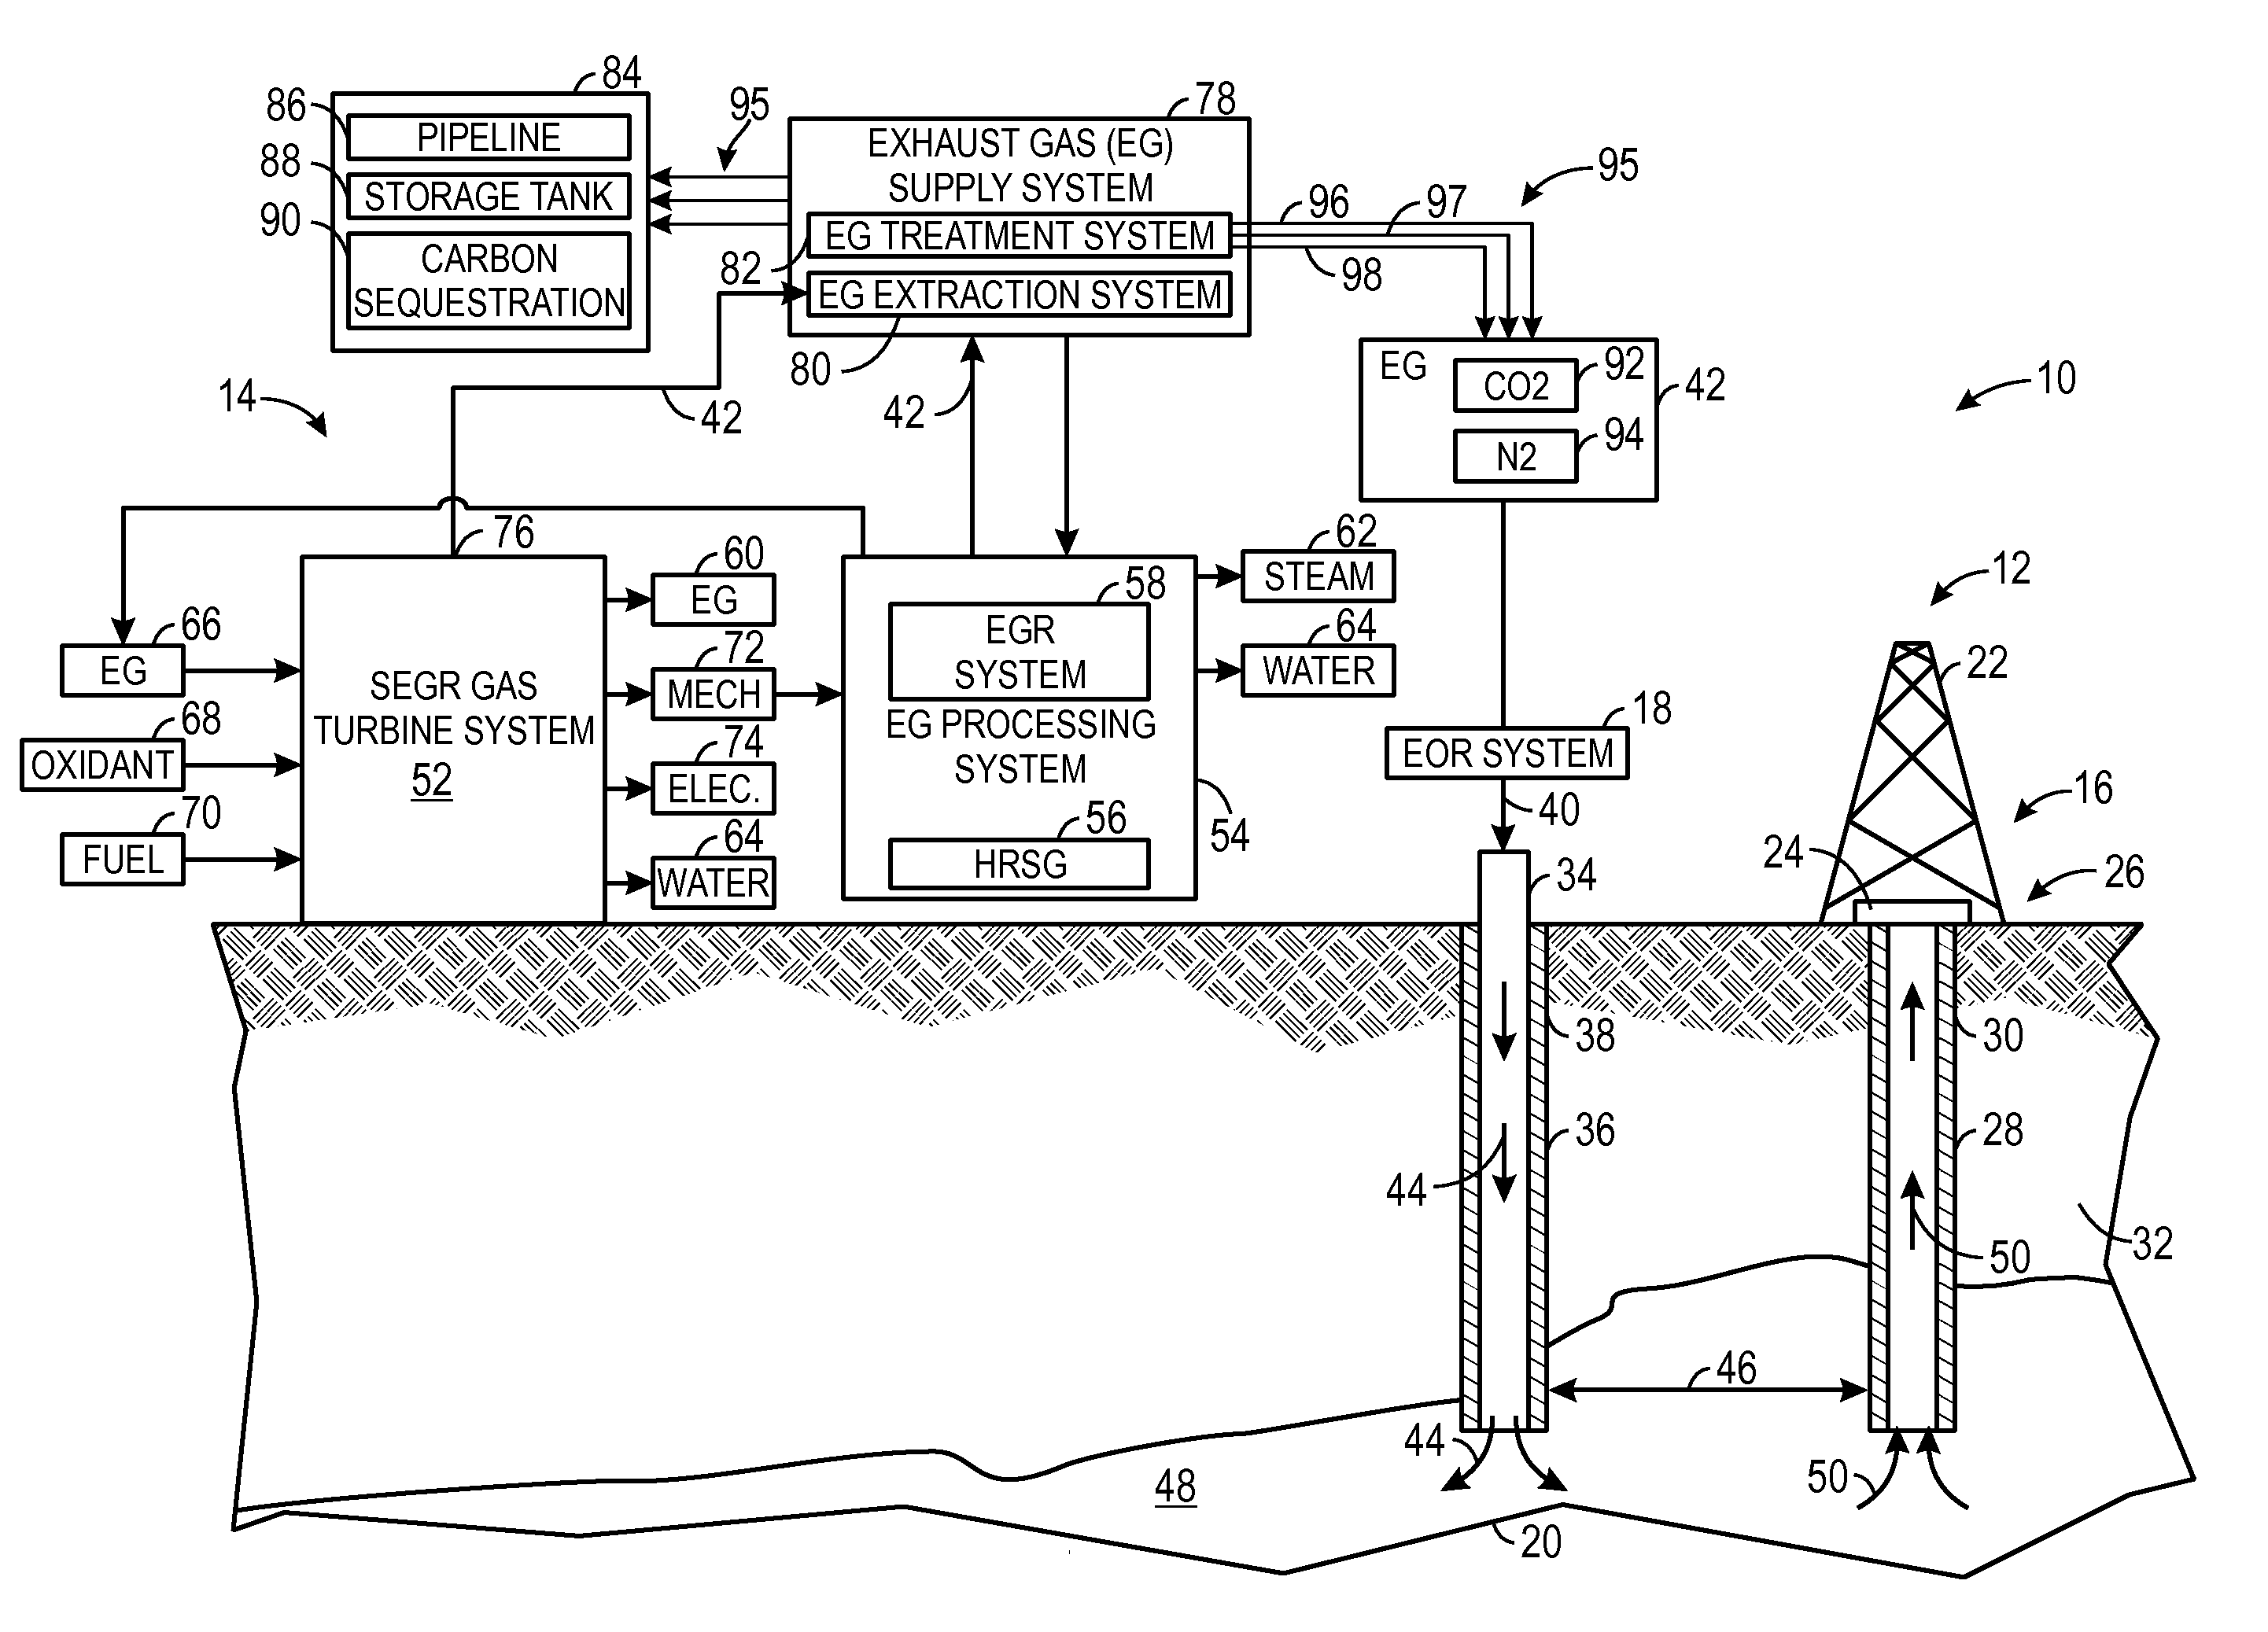 System and method for diffusion combustion with fuel-diluent mixing in a stoichiometric exhaust gas recirculation gas turbine system